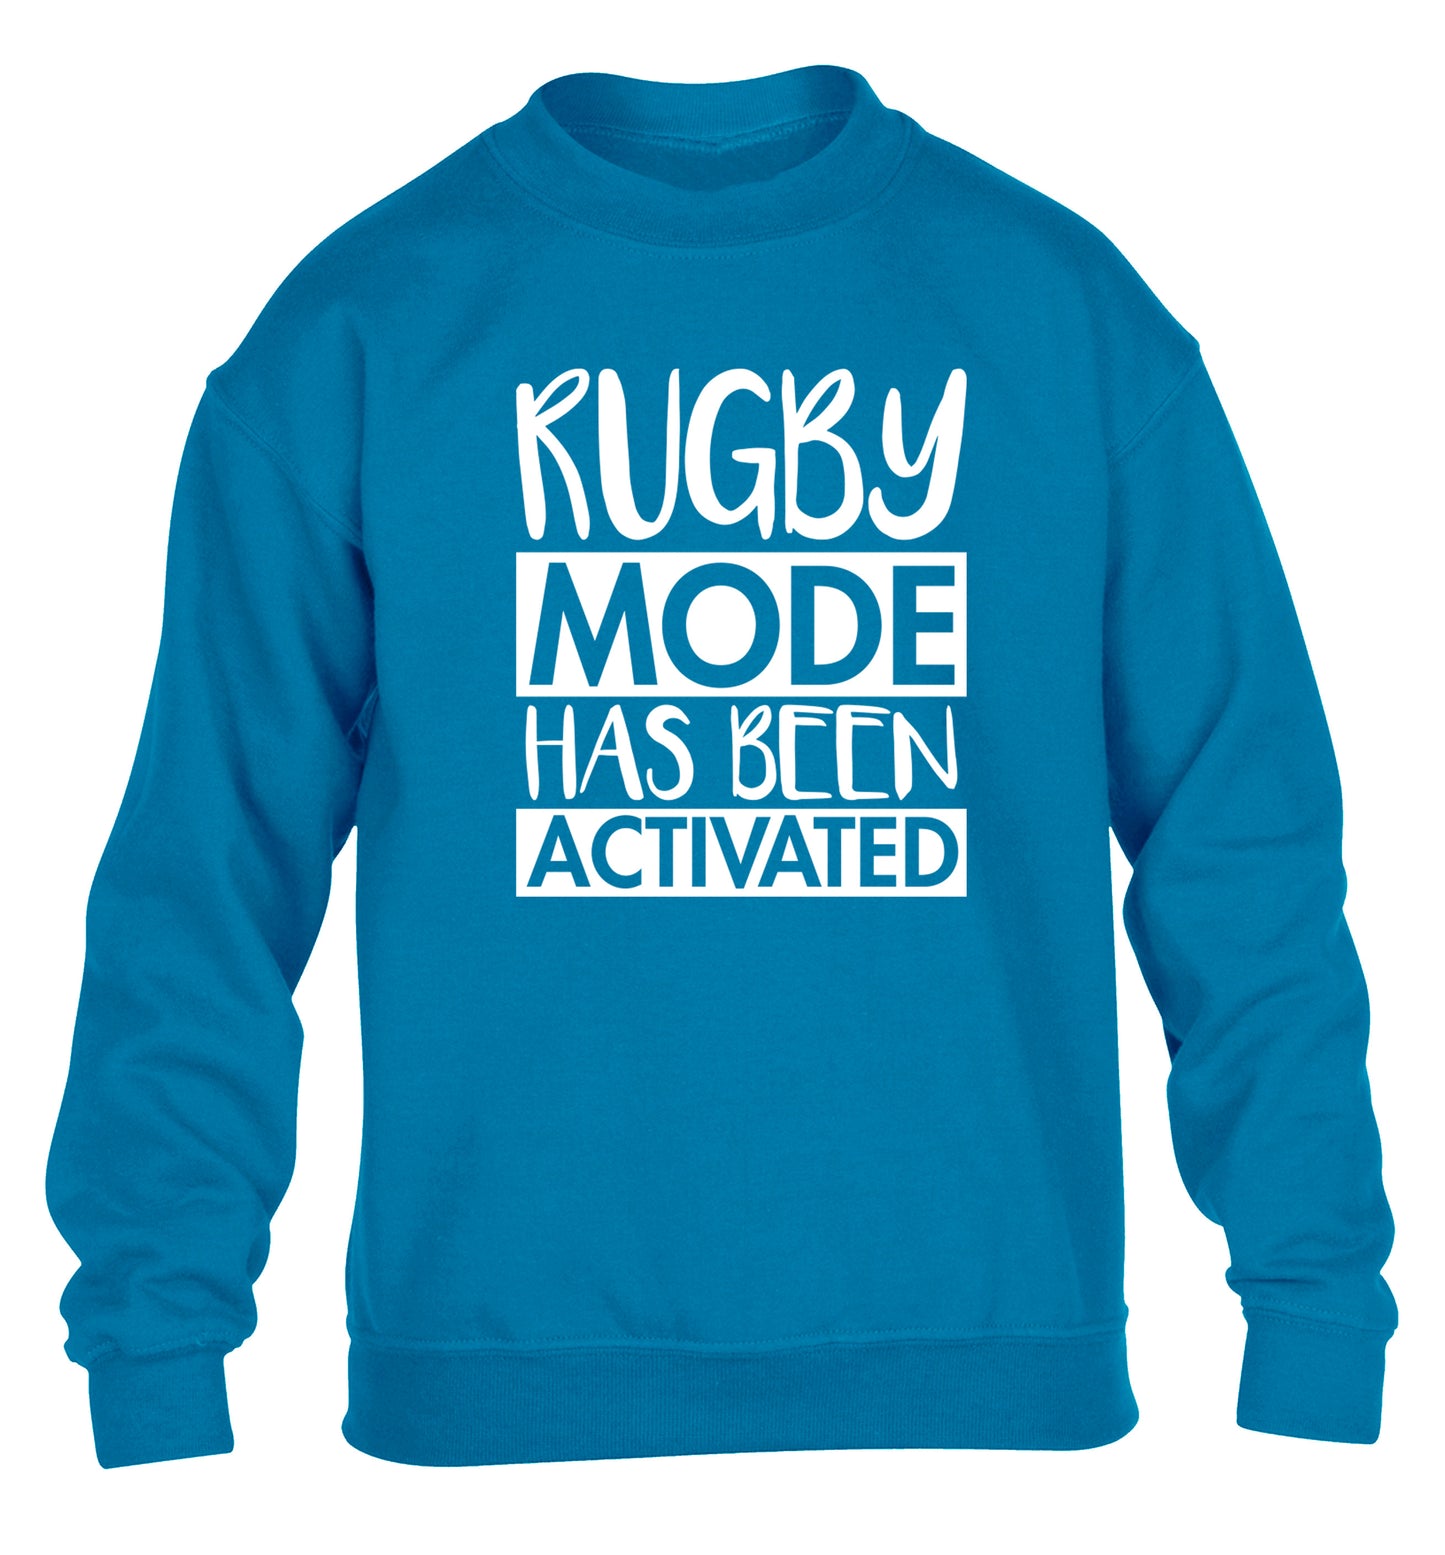 Rugby mode activated children's blue sweater 12-13 Years